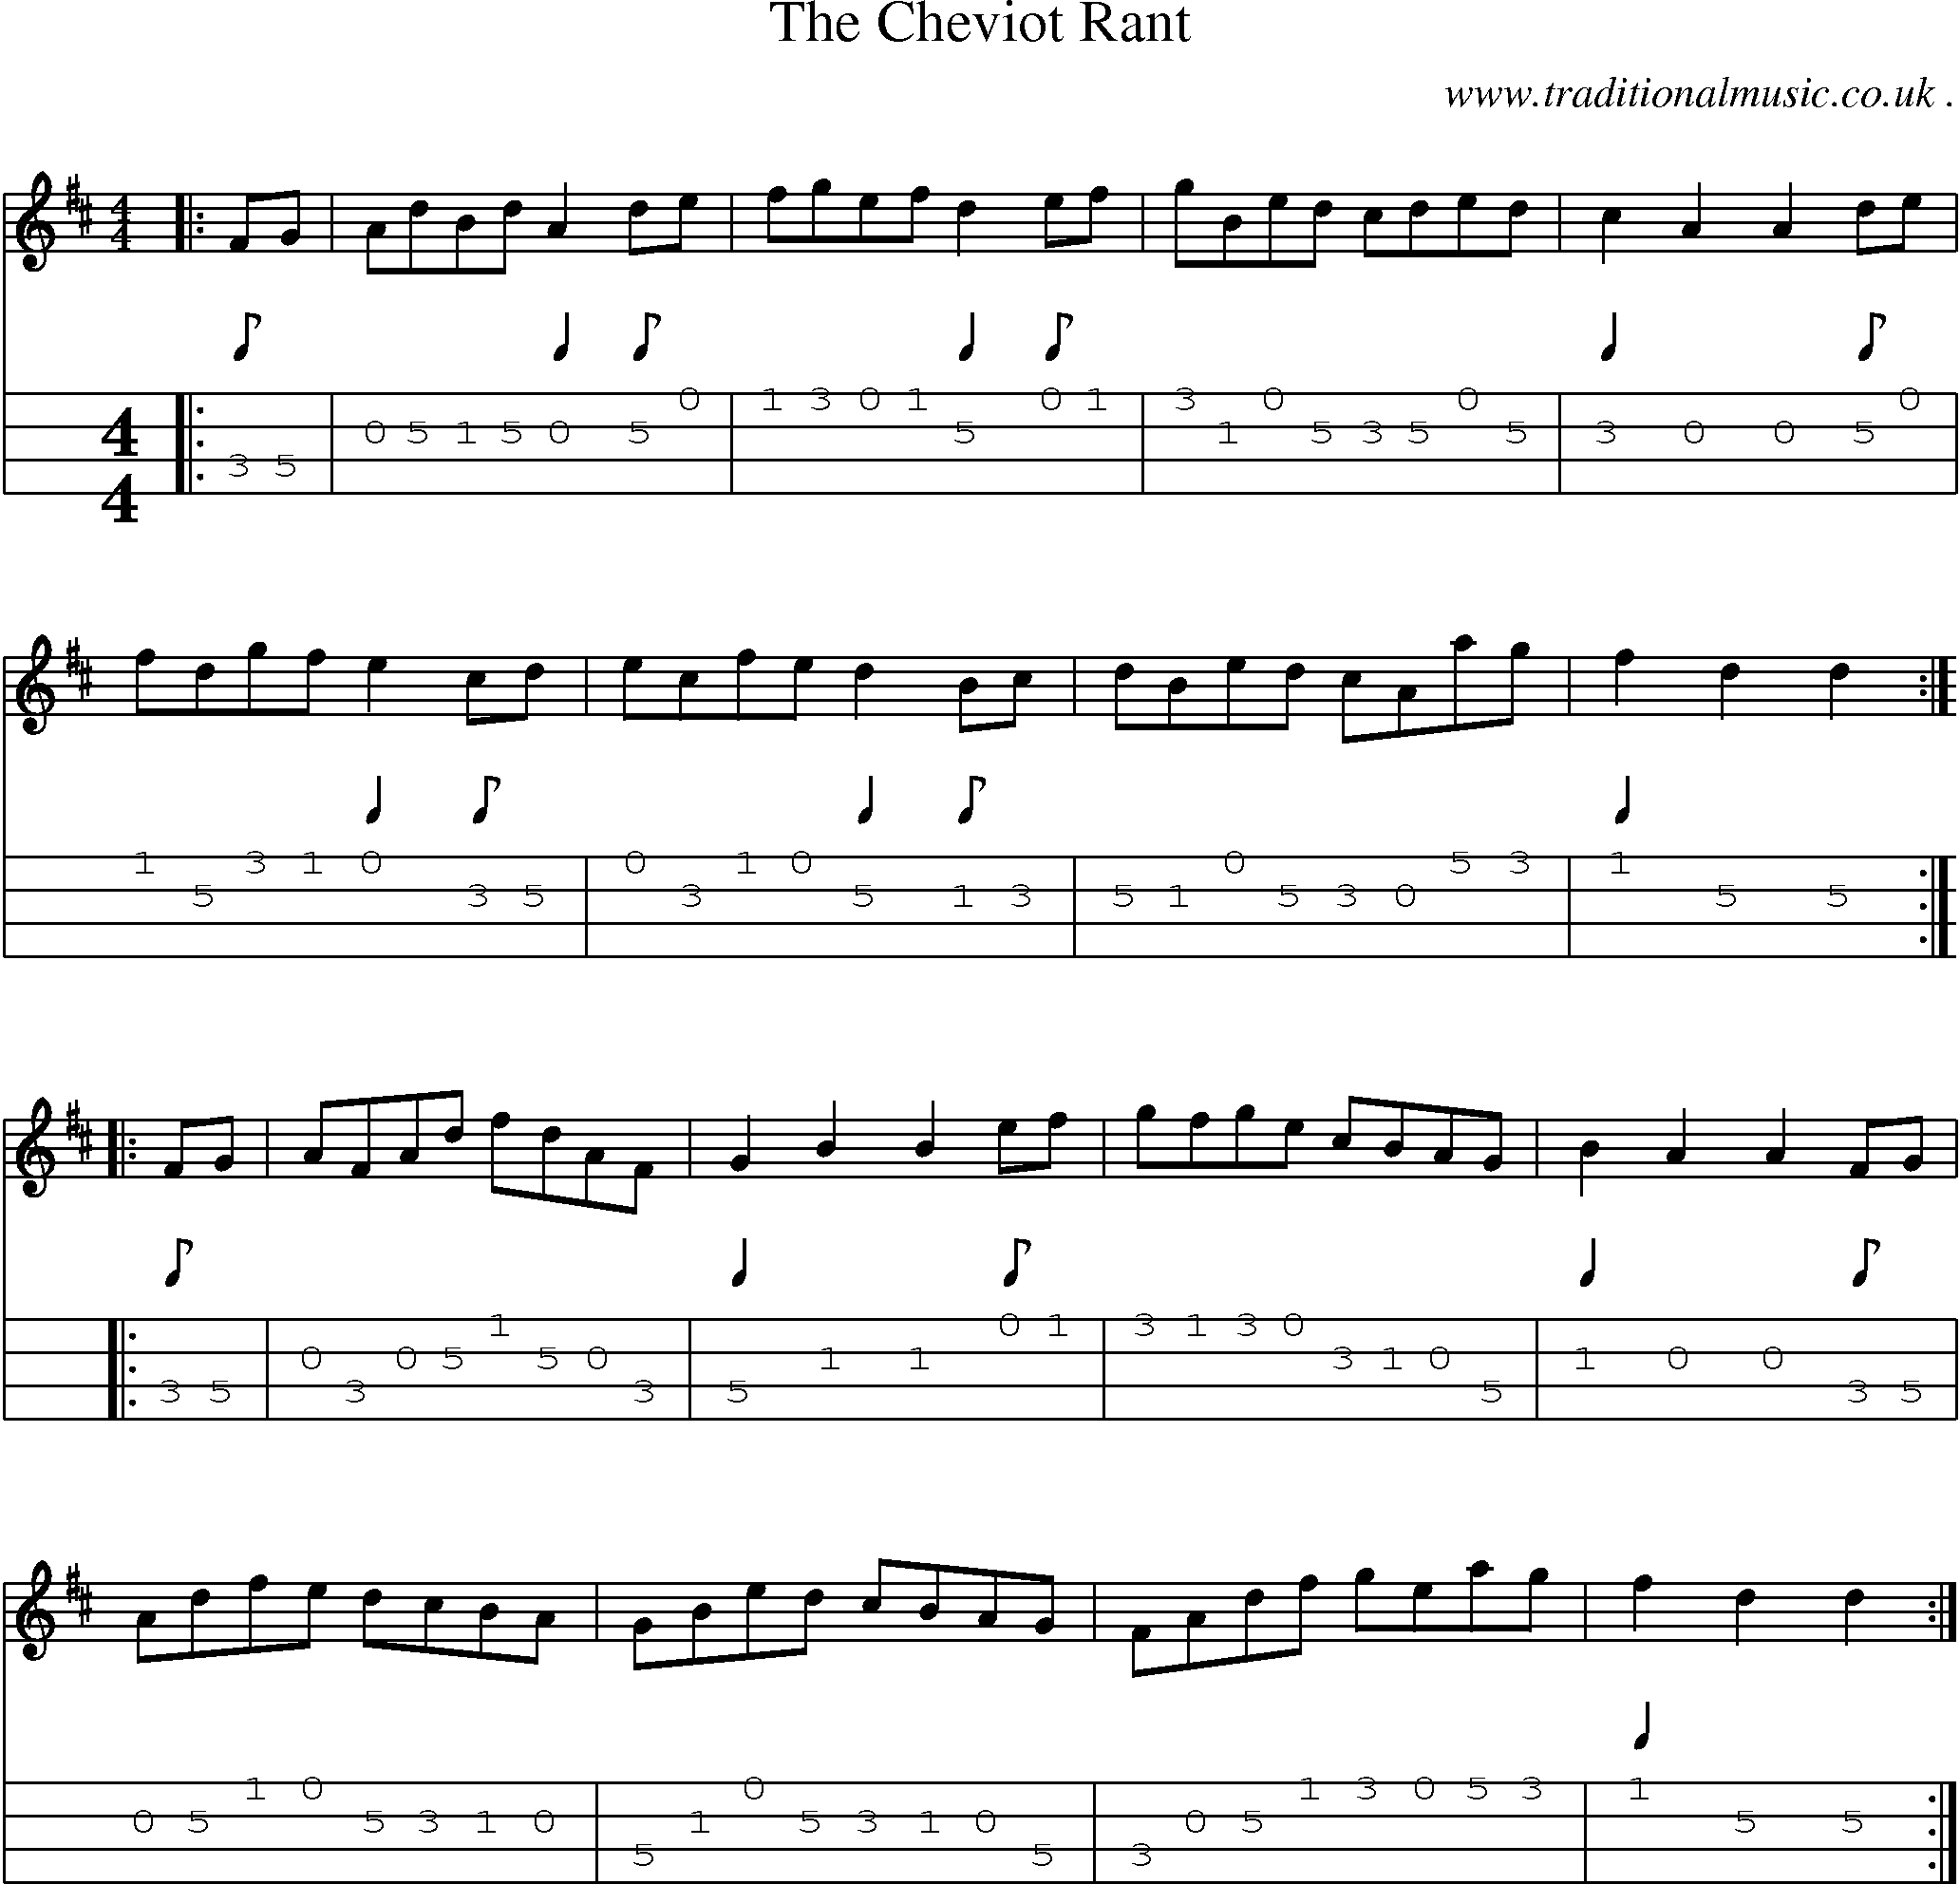 Sheet-Music and Mandolin Tabs for The Cheviot Rant